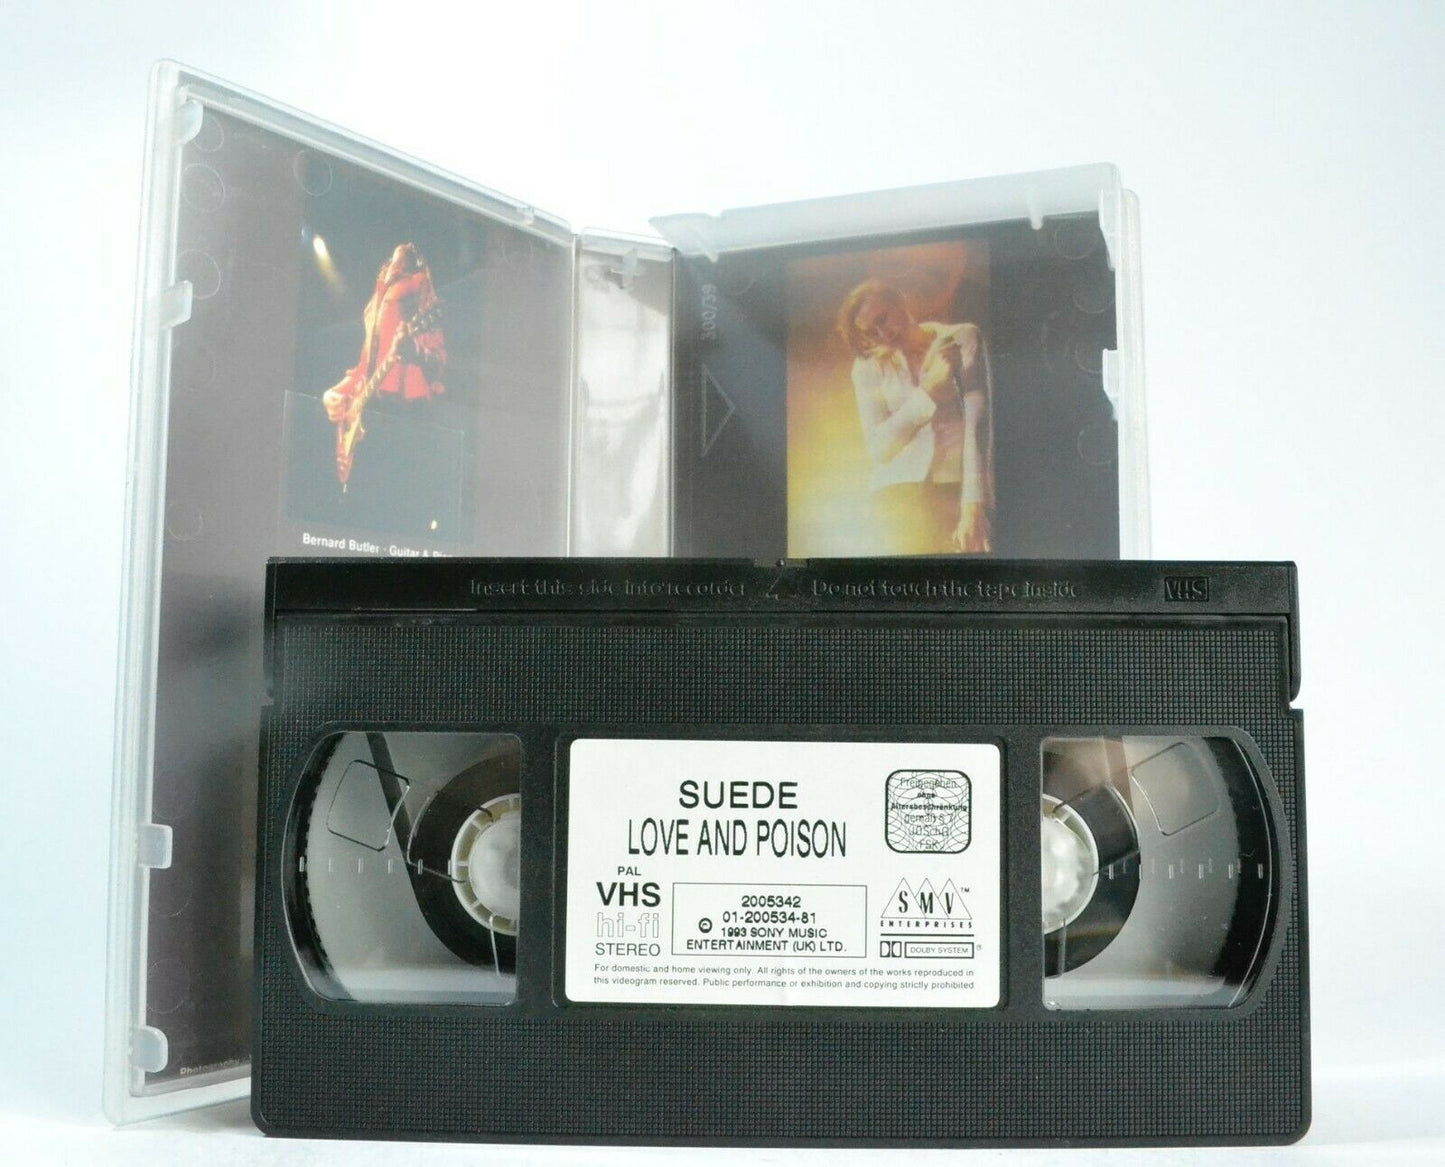 Suede: Love & Poison - Britpop - Brett Anderson -'The Drowners'- Music - VHS-